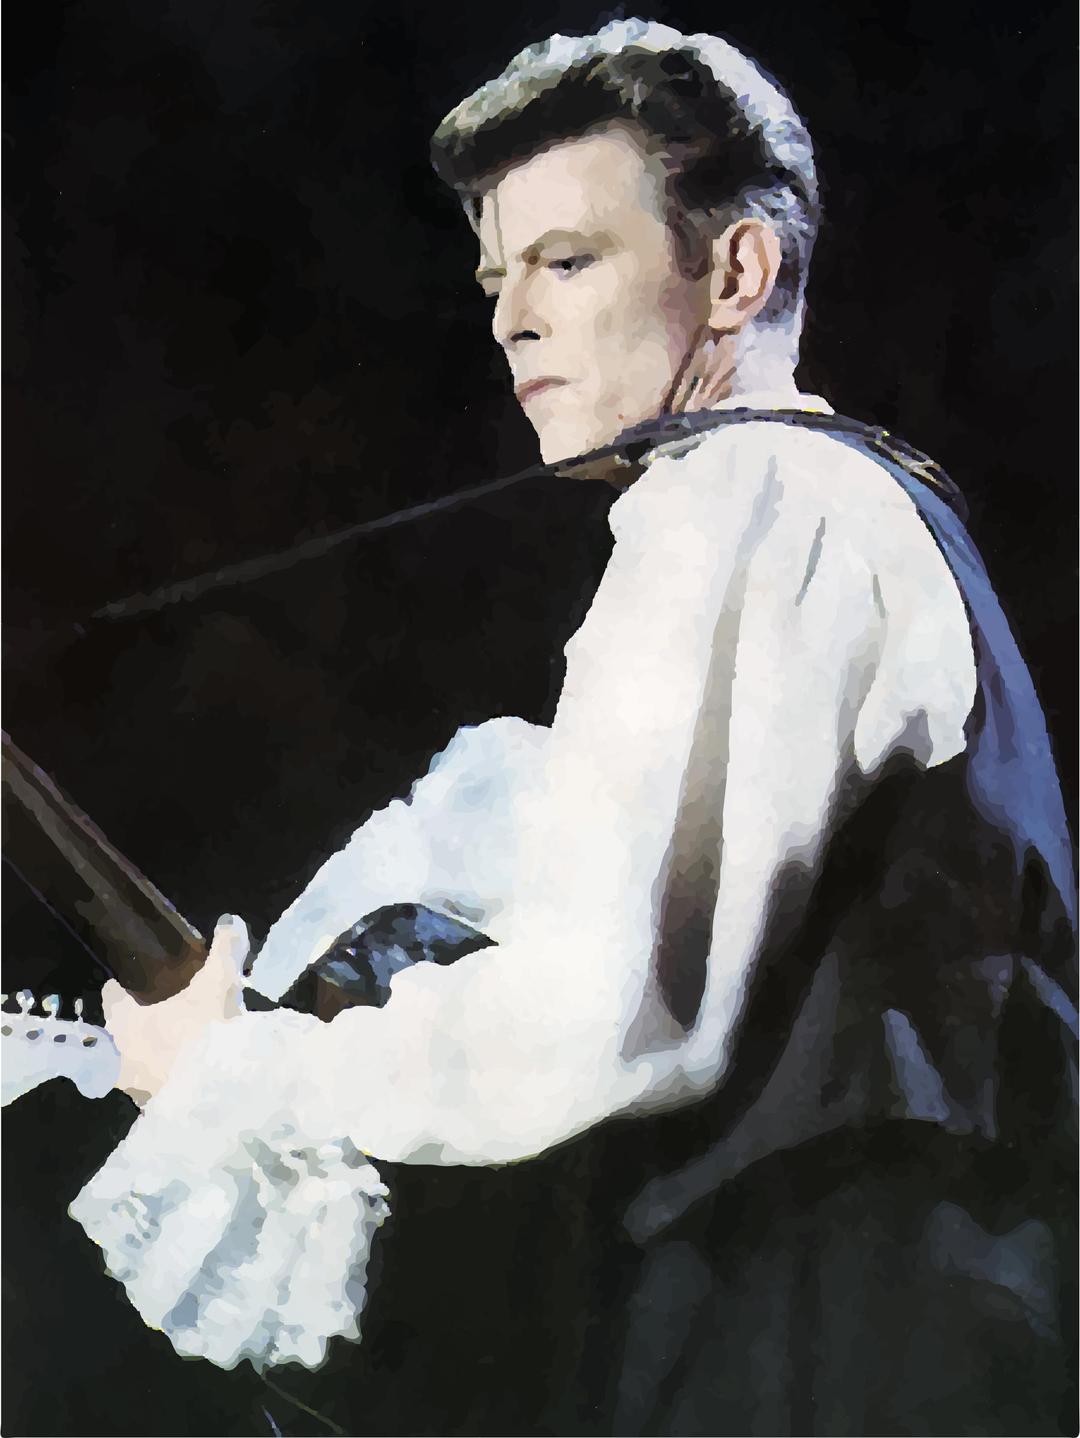 David Bowie Rock In Chile September 1990 png transparent